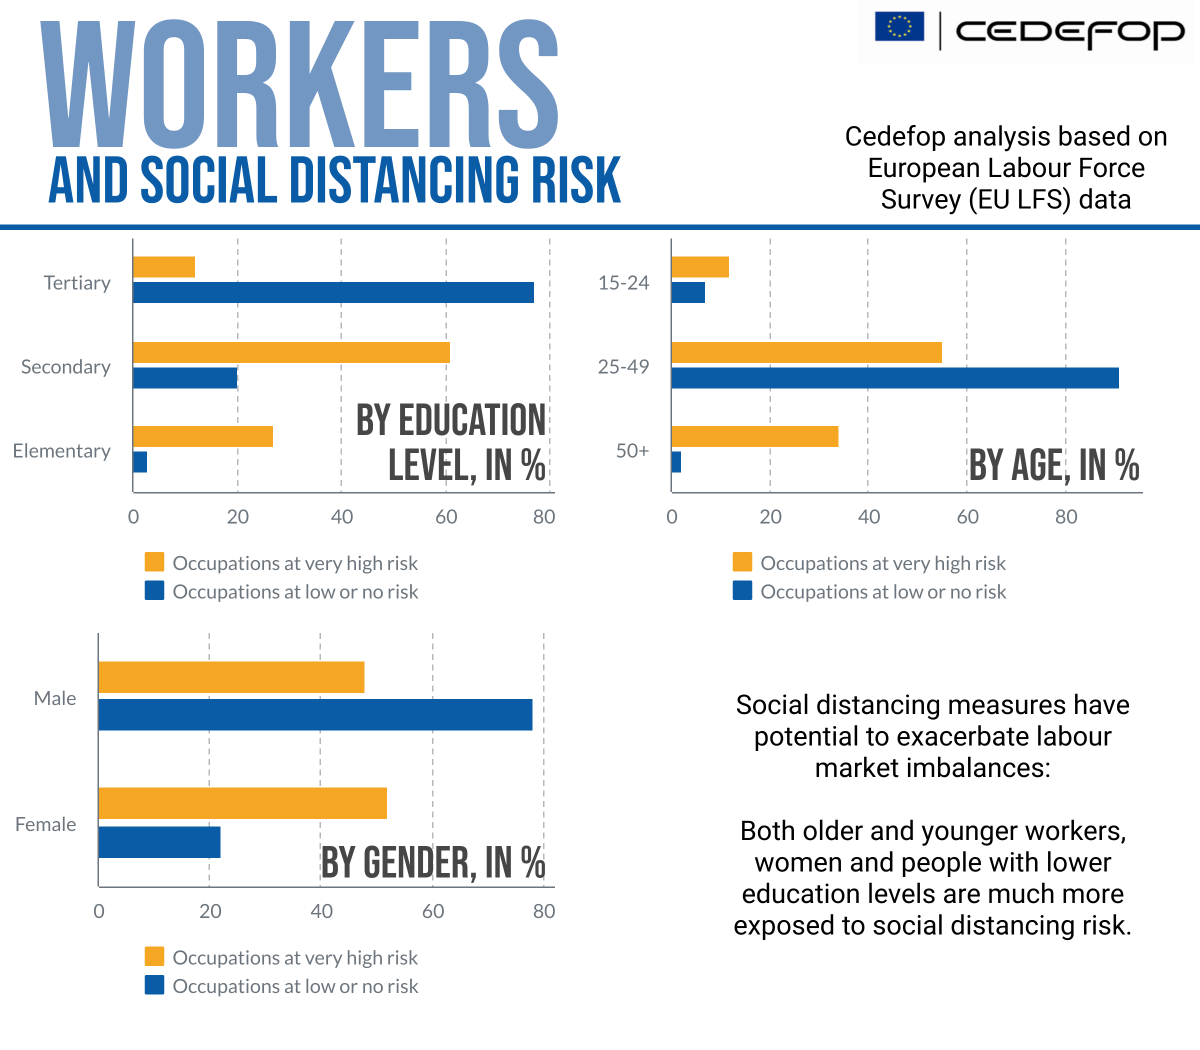 Workers and social distancing risk - Cedefop analysis based on European Labour Force Survey (EU LFS) data